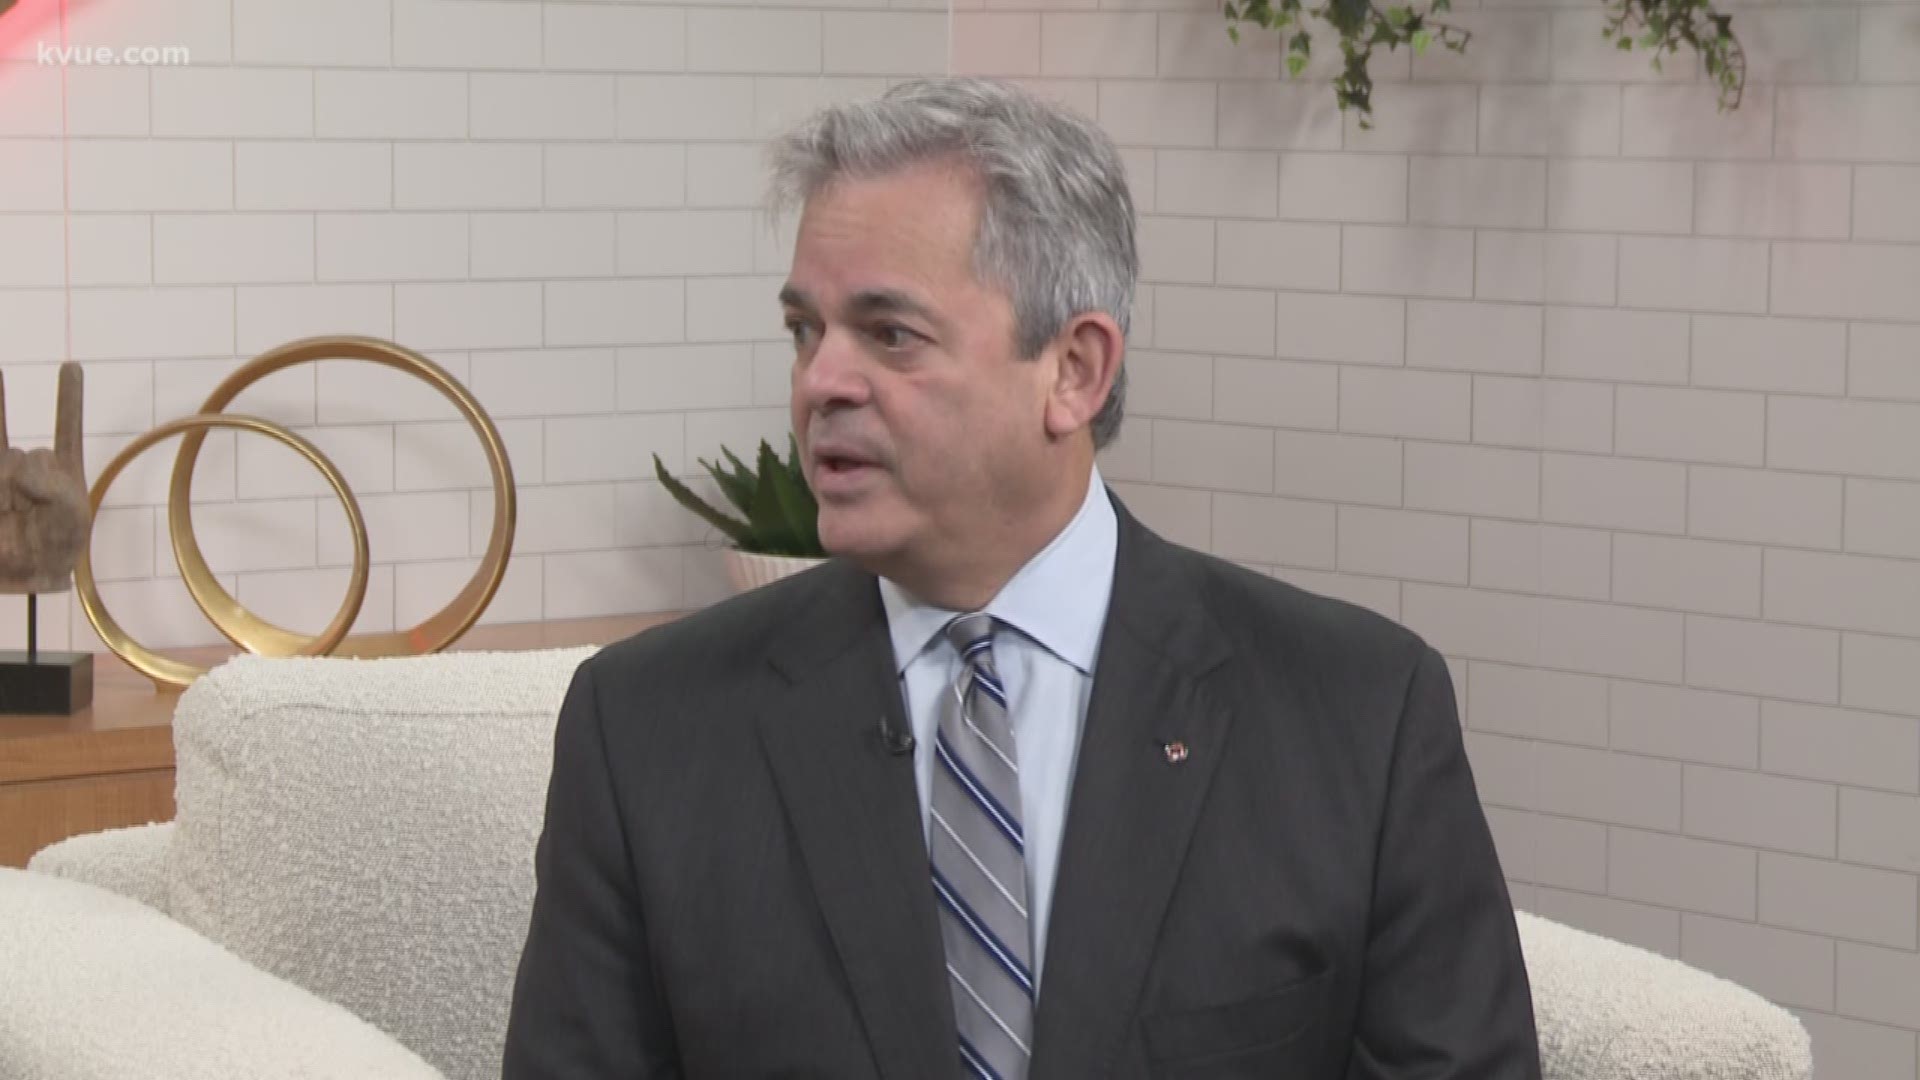 Mayor Steve Adler discussed what the city is doing to prevent the spread of coronavirus.